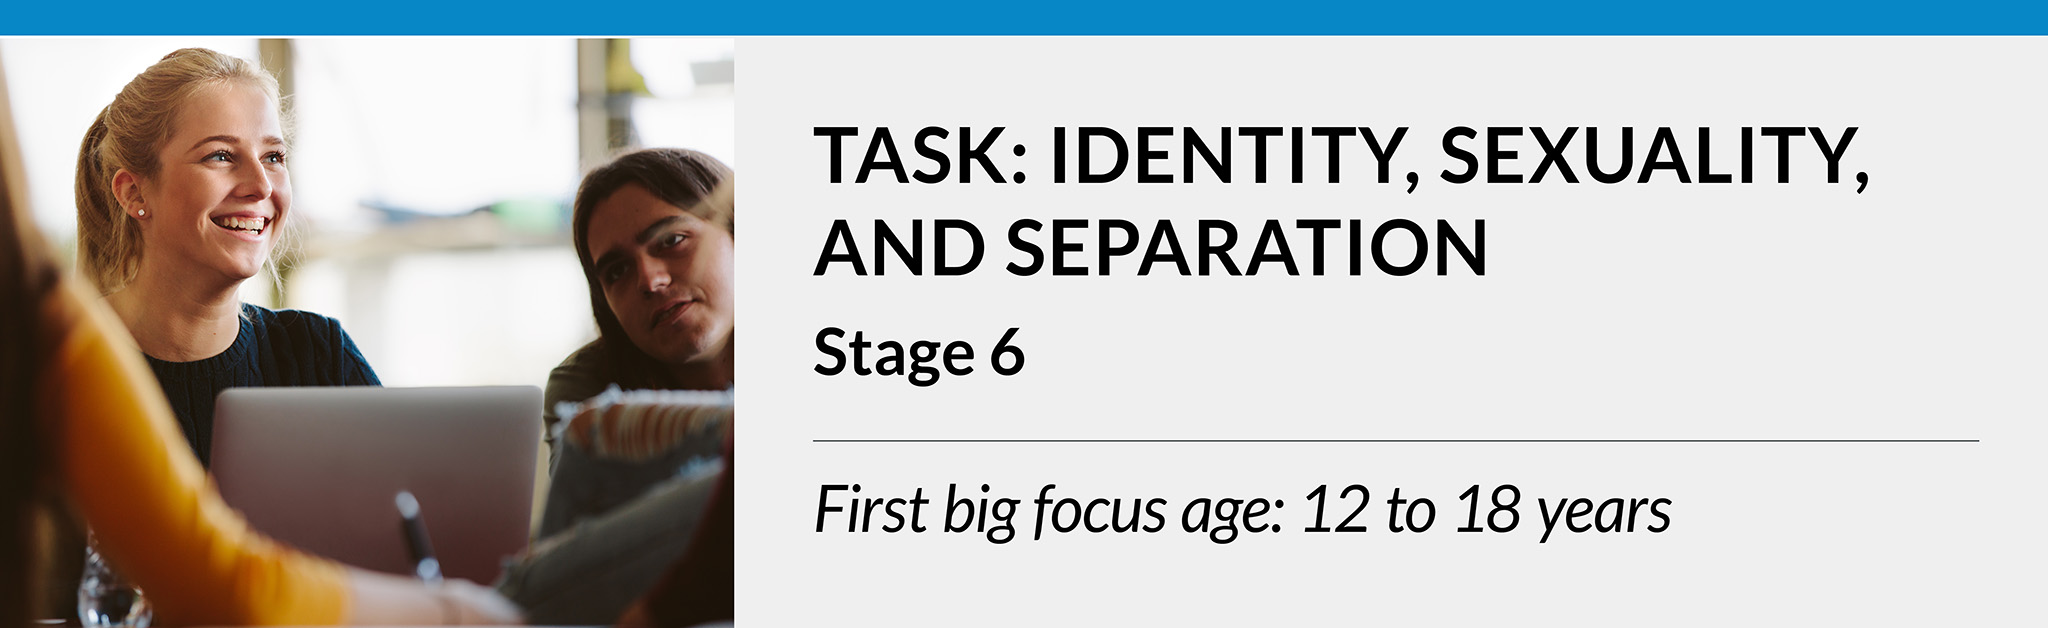 Task: Identity, sexuality, and separation. Stage 6. First big focus age: 12 to 18 years.